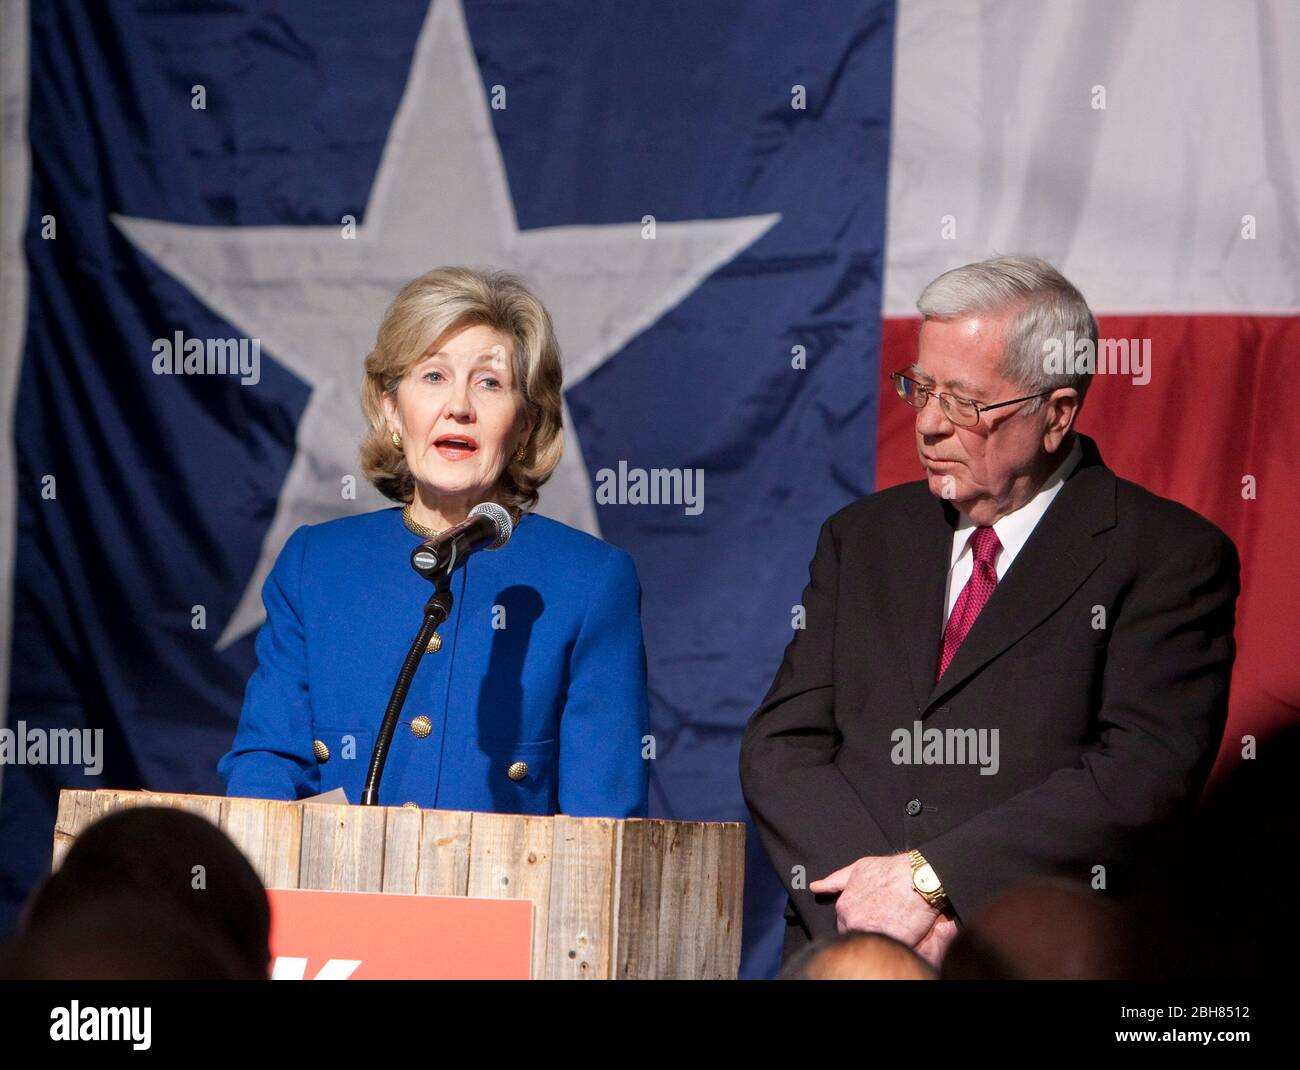 Dallas Texas USA, March 2, 2010: U.S. Senator Kay Bailey Hutchison (l) alongside her husband, Ray, gives a concession speech at Eddie Deen's Ranch restaurant in downtown Dallas after her defeat in the governor's race by incumbent Texas Governor Rick Perry in the Republican primary. Hutchison did not announce her future plans which may include resigning her Senate seat. © Bob Daemmrich Stock Photo